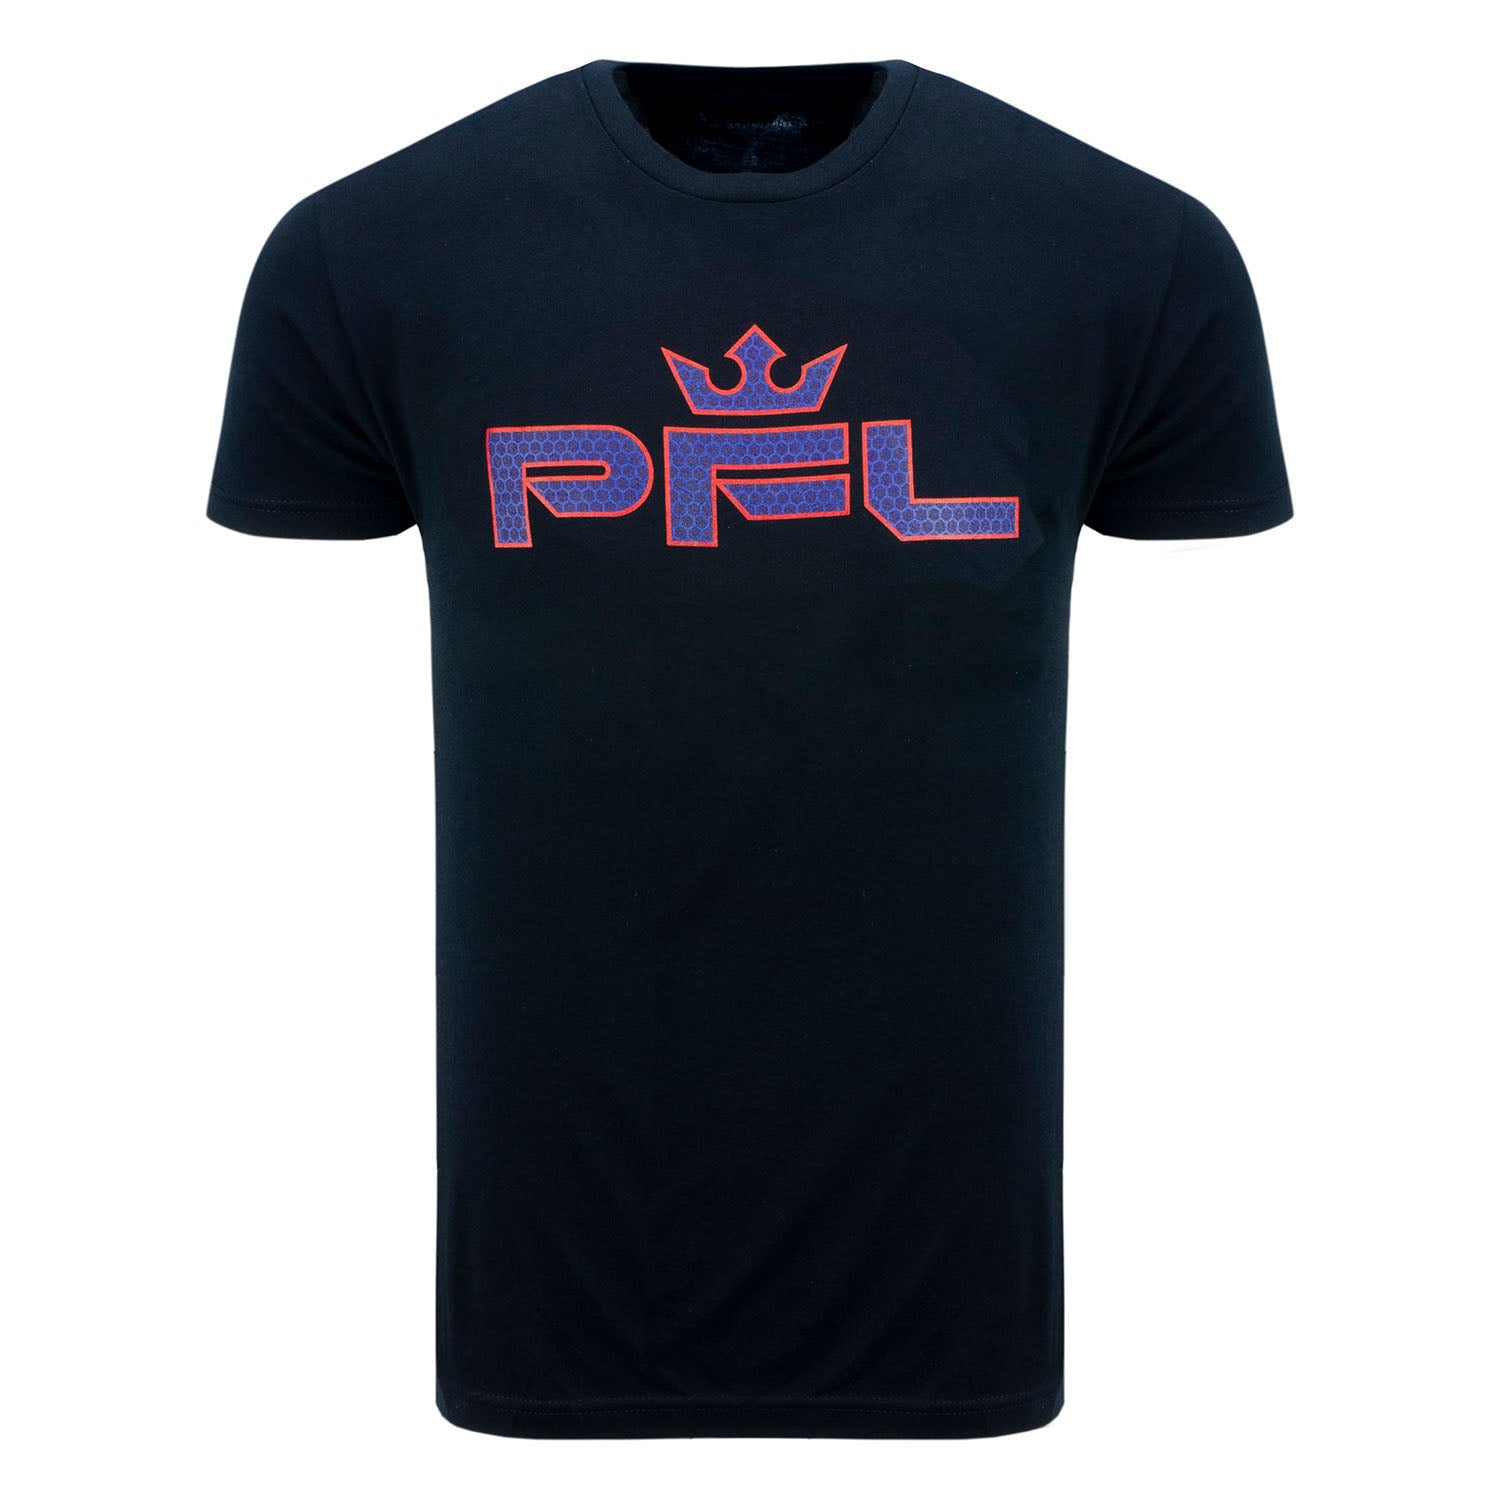 PFL Honeycomb Tee in Black - Front View